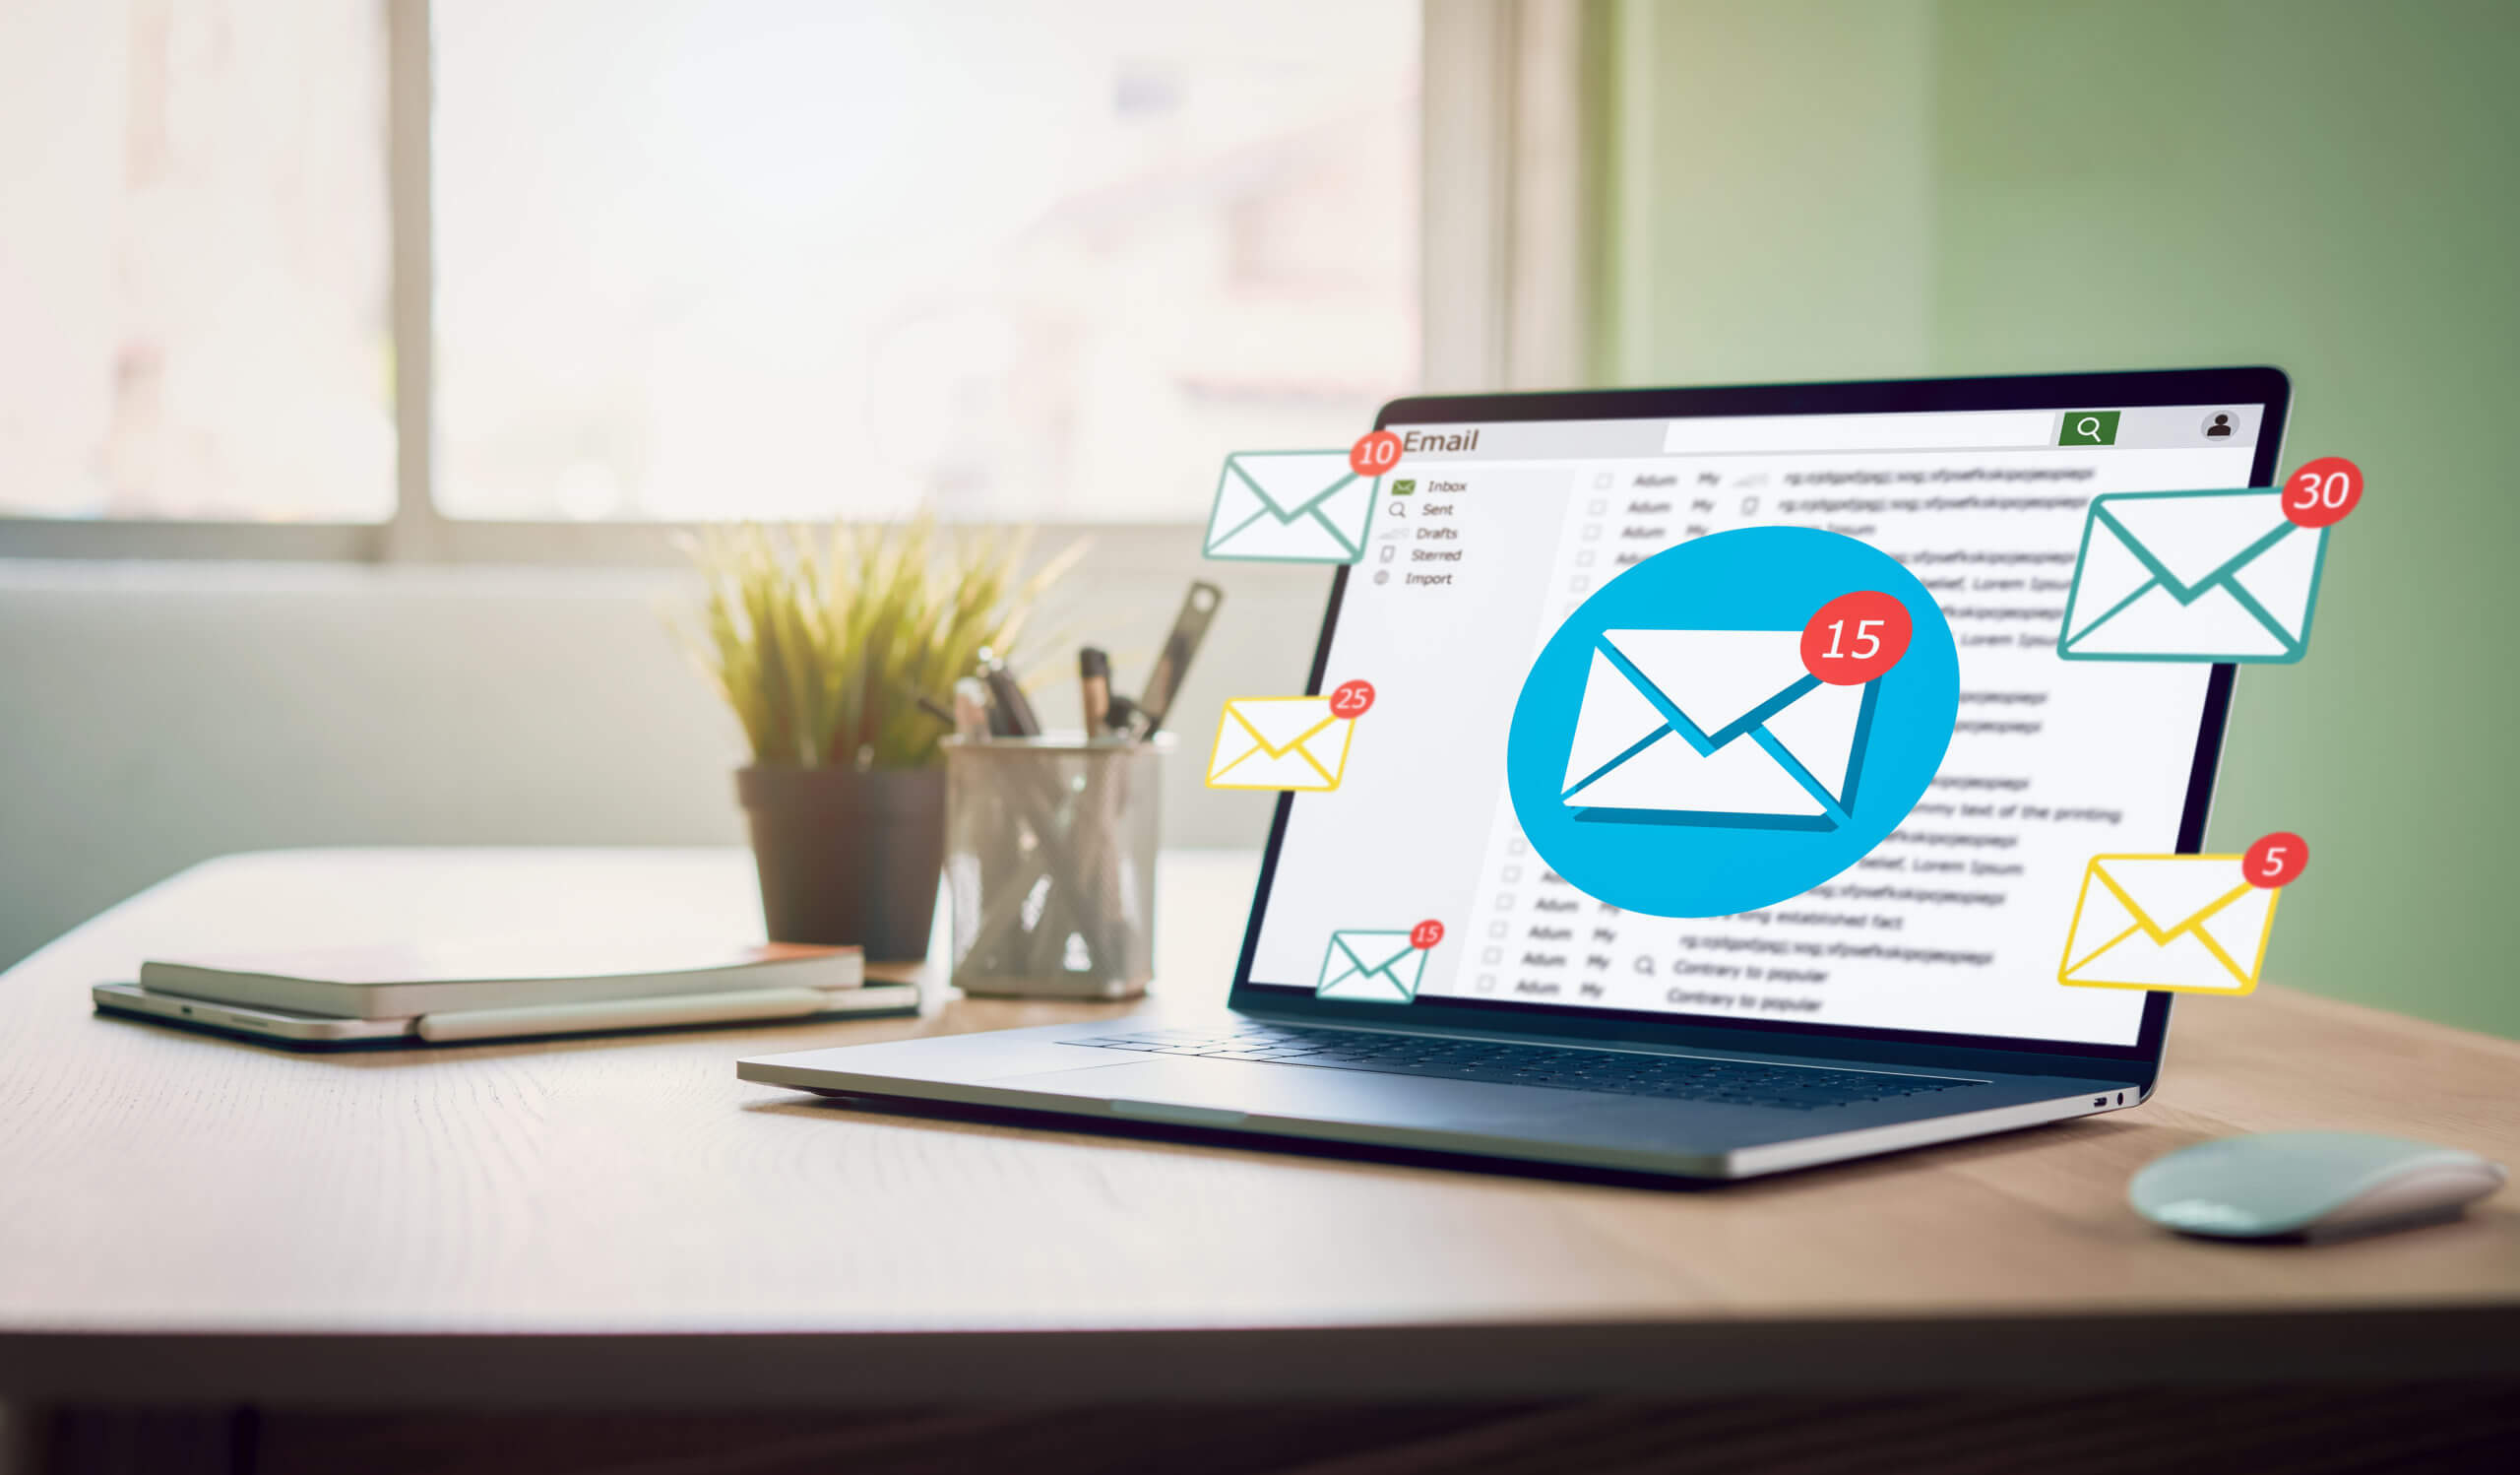 Email tips and productivity hacks